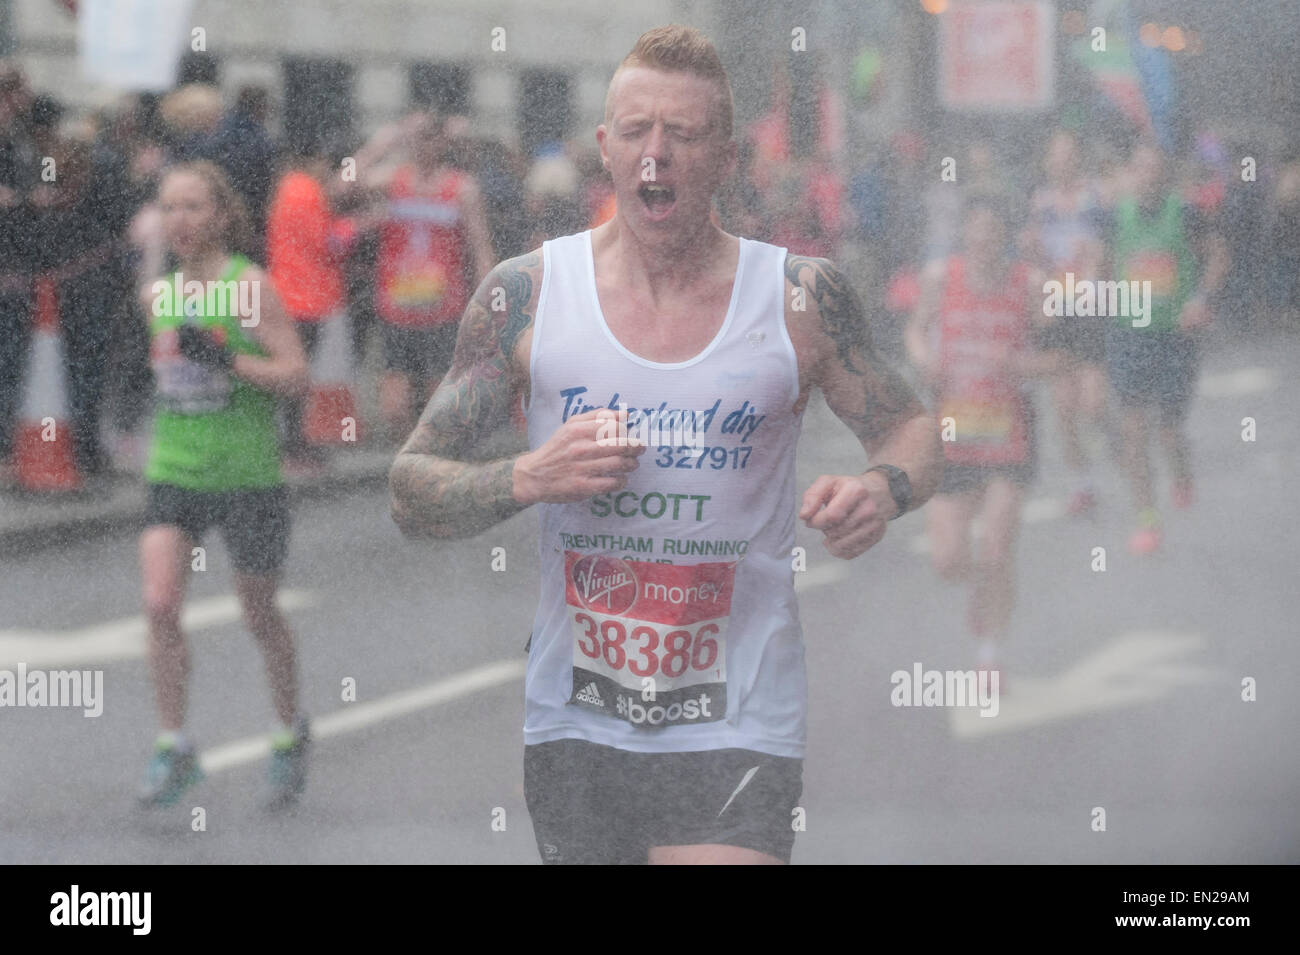 London, UK. 26 April 2015. A runner passes by a roadside shower with two miles to go as nearly 38,000 runners took part in the Virgin Money London Marathon. Credit:  Stephen Chung / Alamy Live News Stock Photo